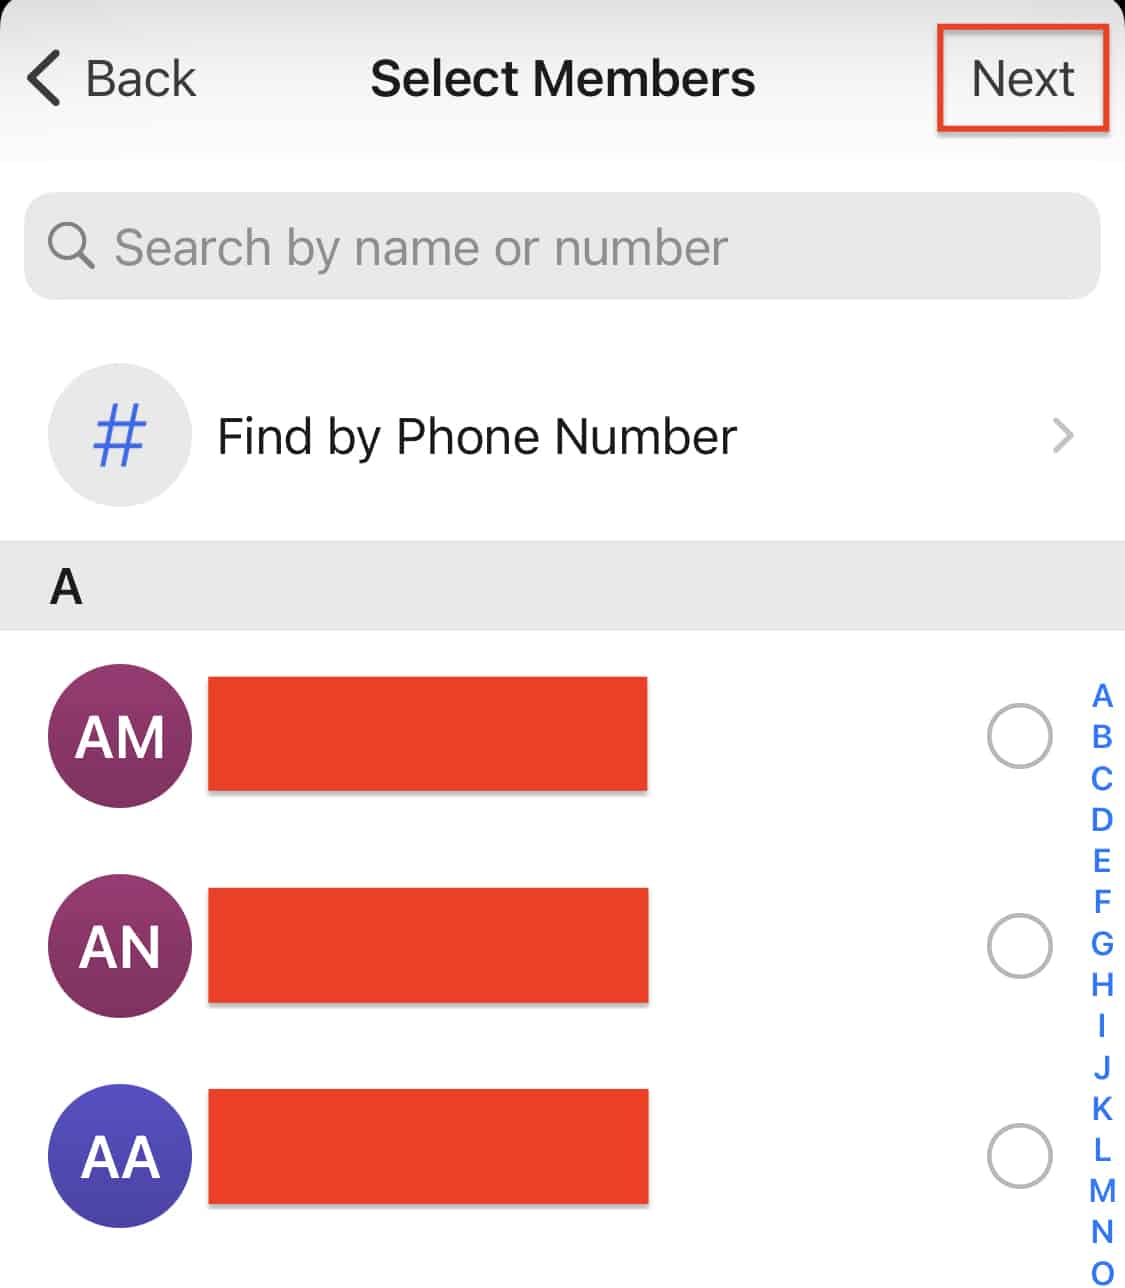 How to make a group on the Signal Messaging app